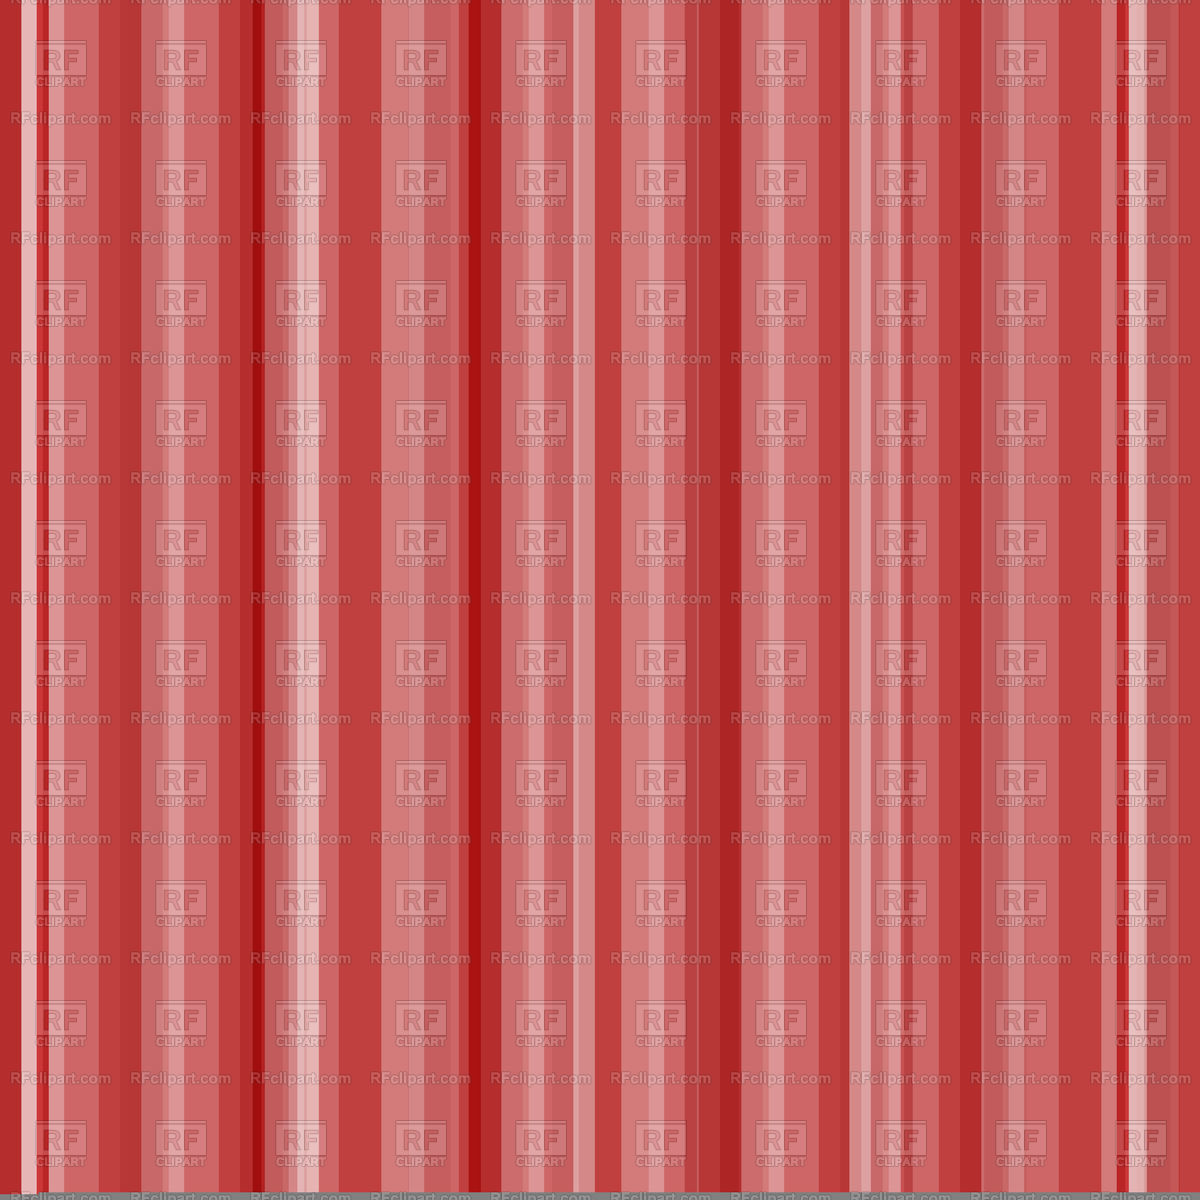 Abstract Red Vertical Striped Wallpaper Vector Image - Pattern - HD Wallpaper 